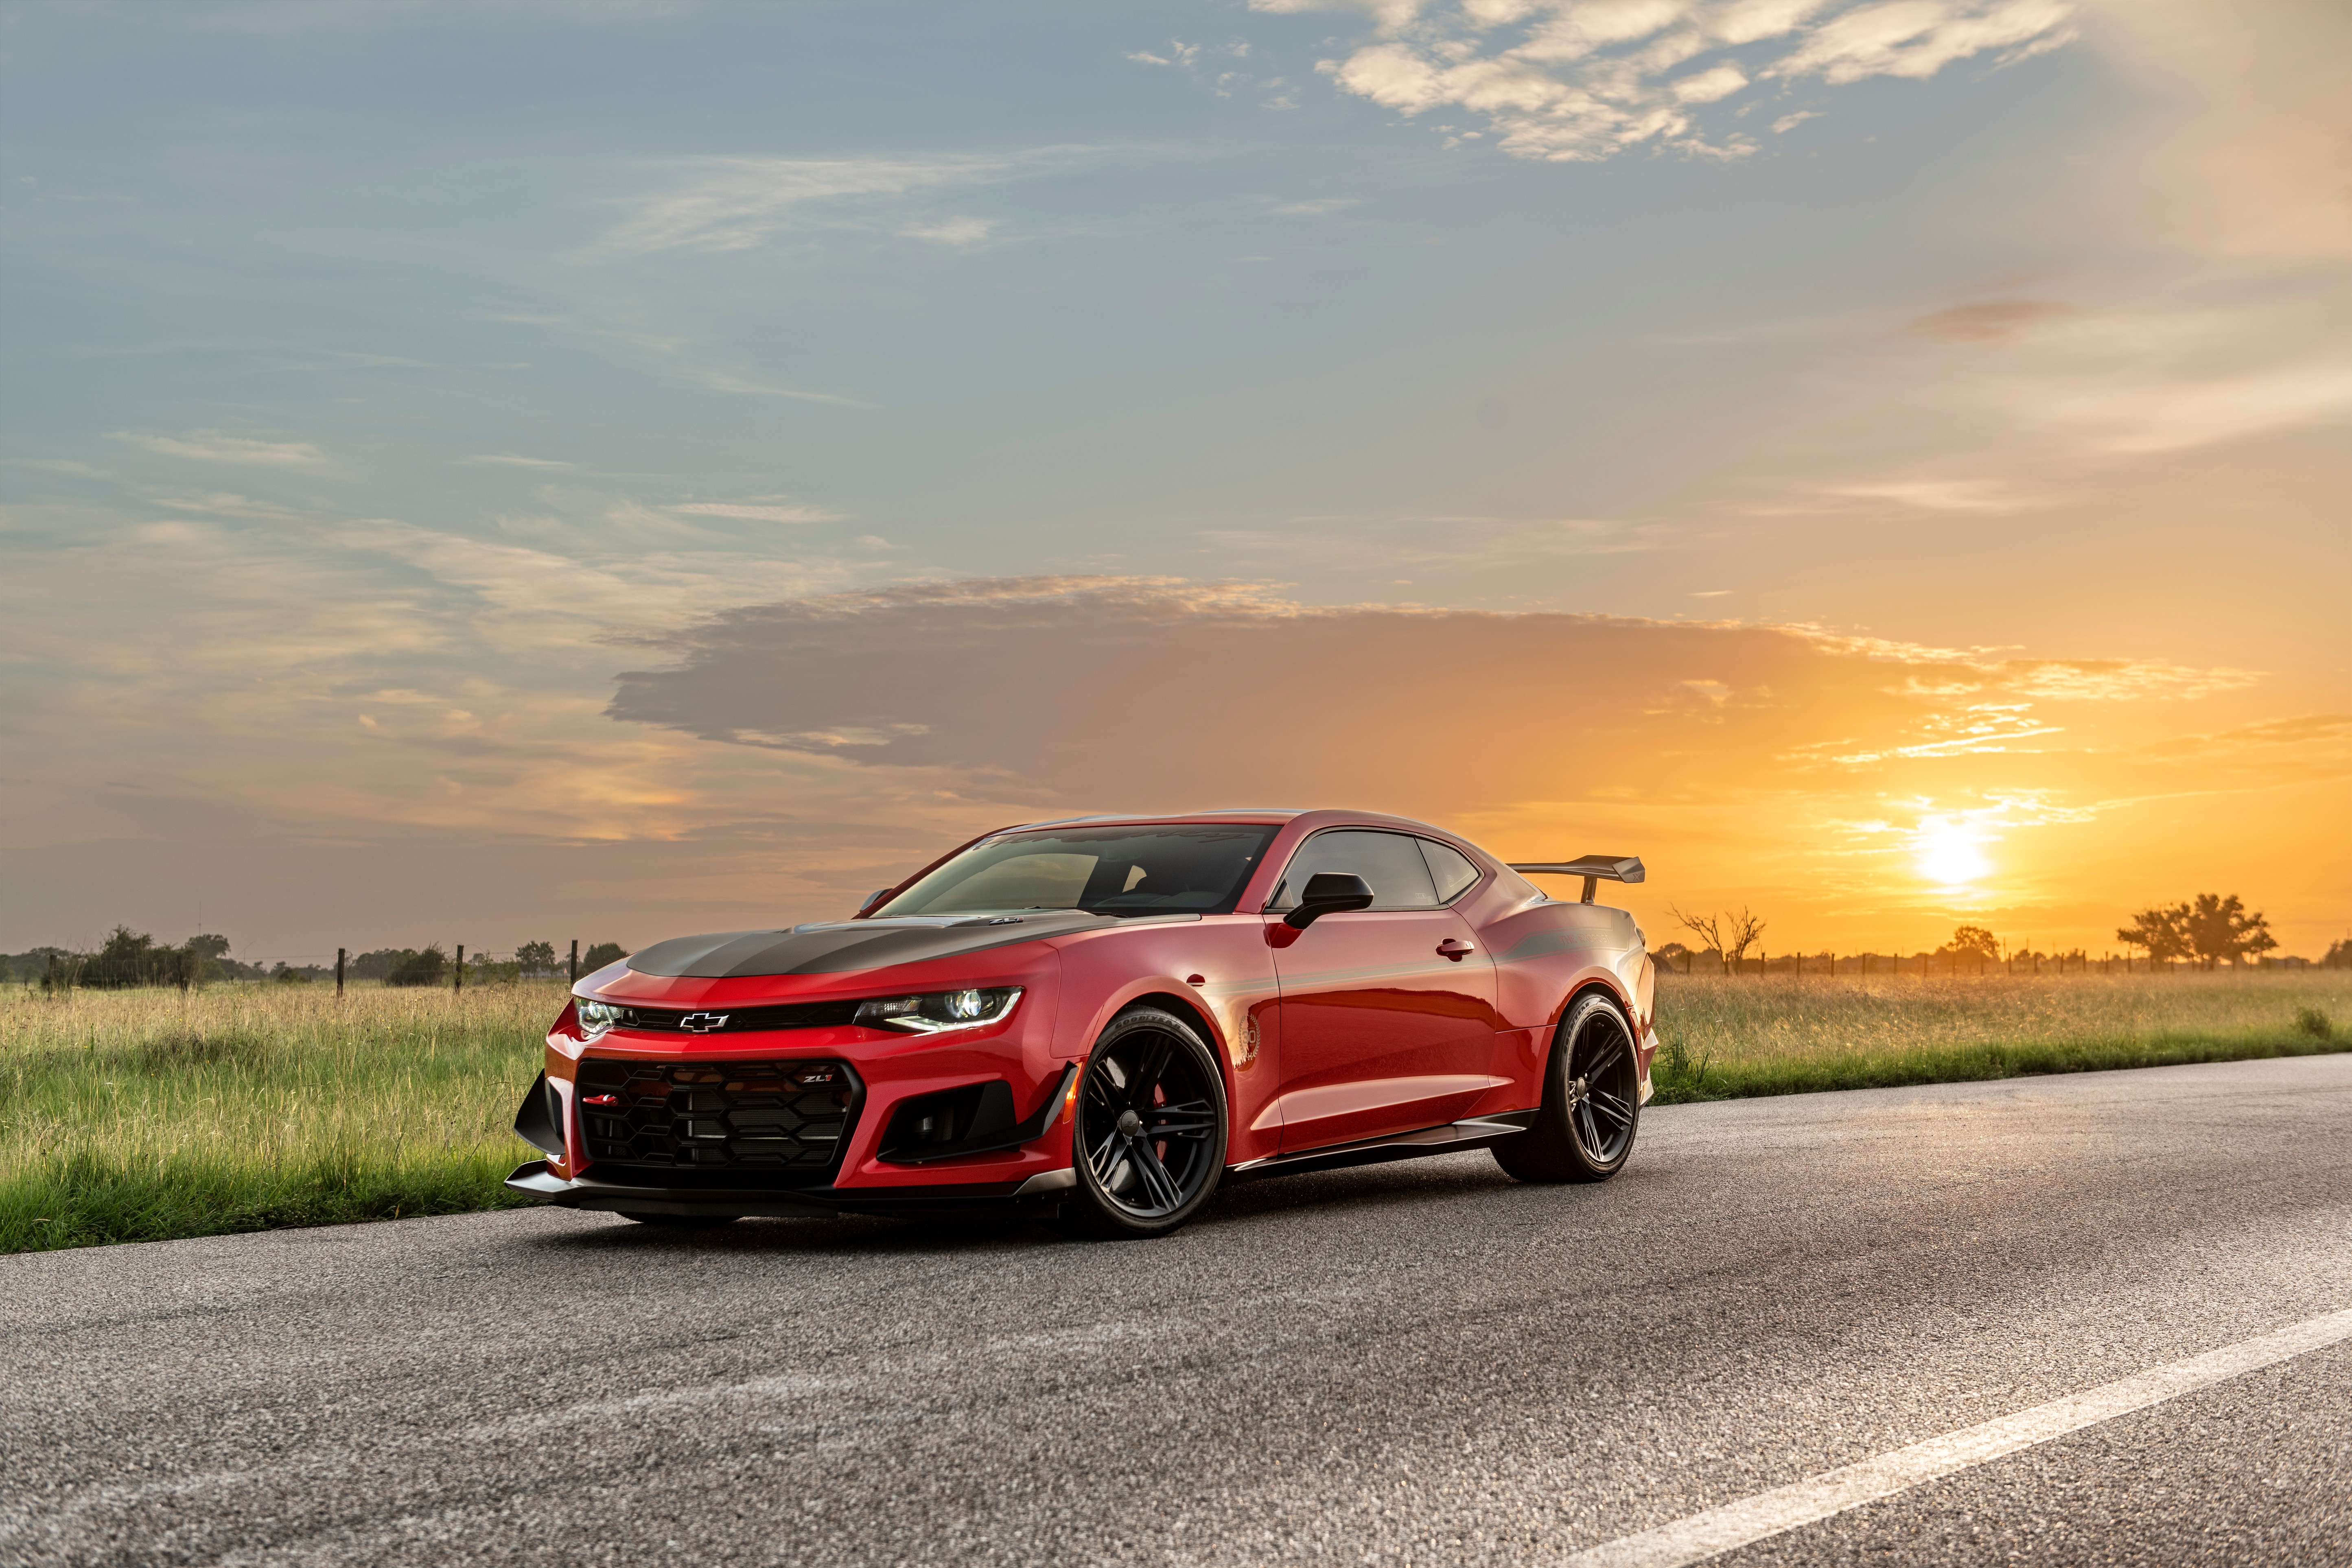 Chevrolet Camaro, Chevrolet, Cars wallpaper | Download Free backgrounds